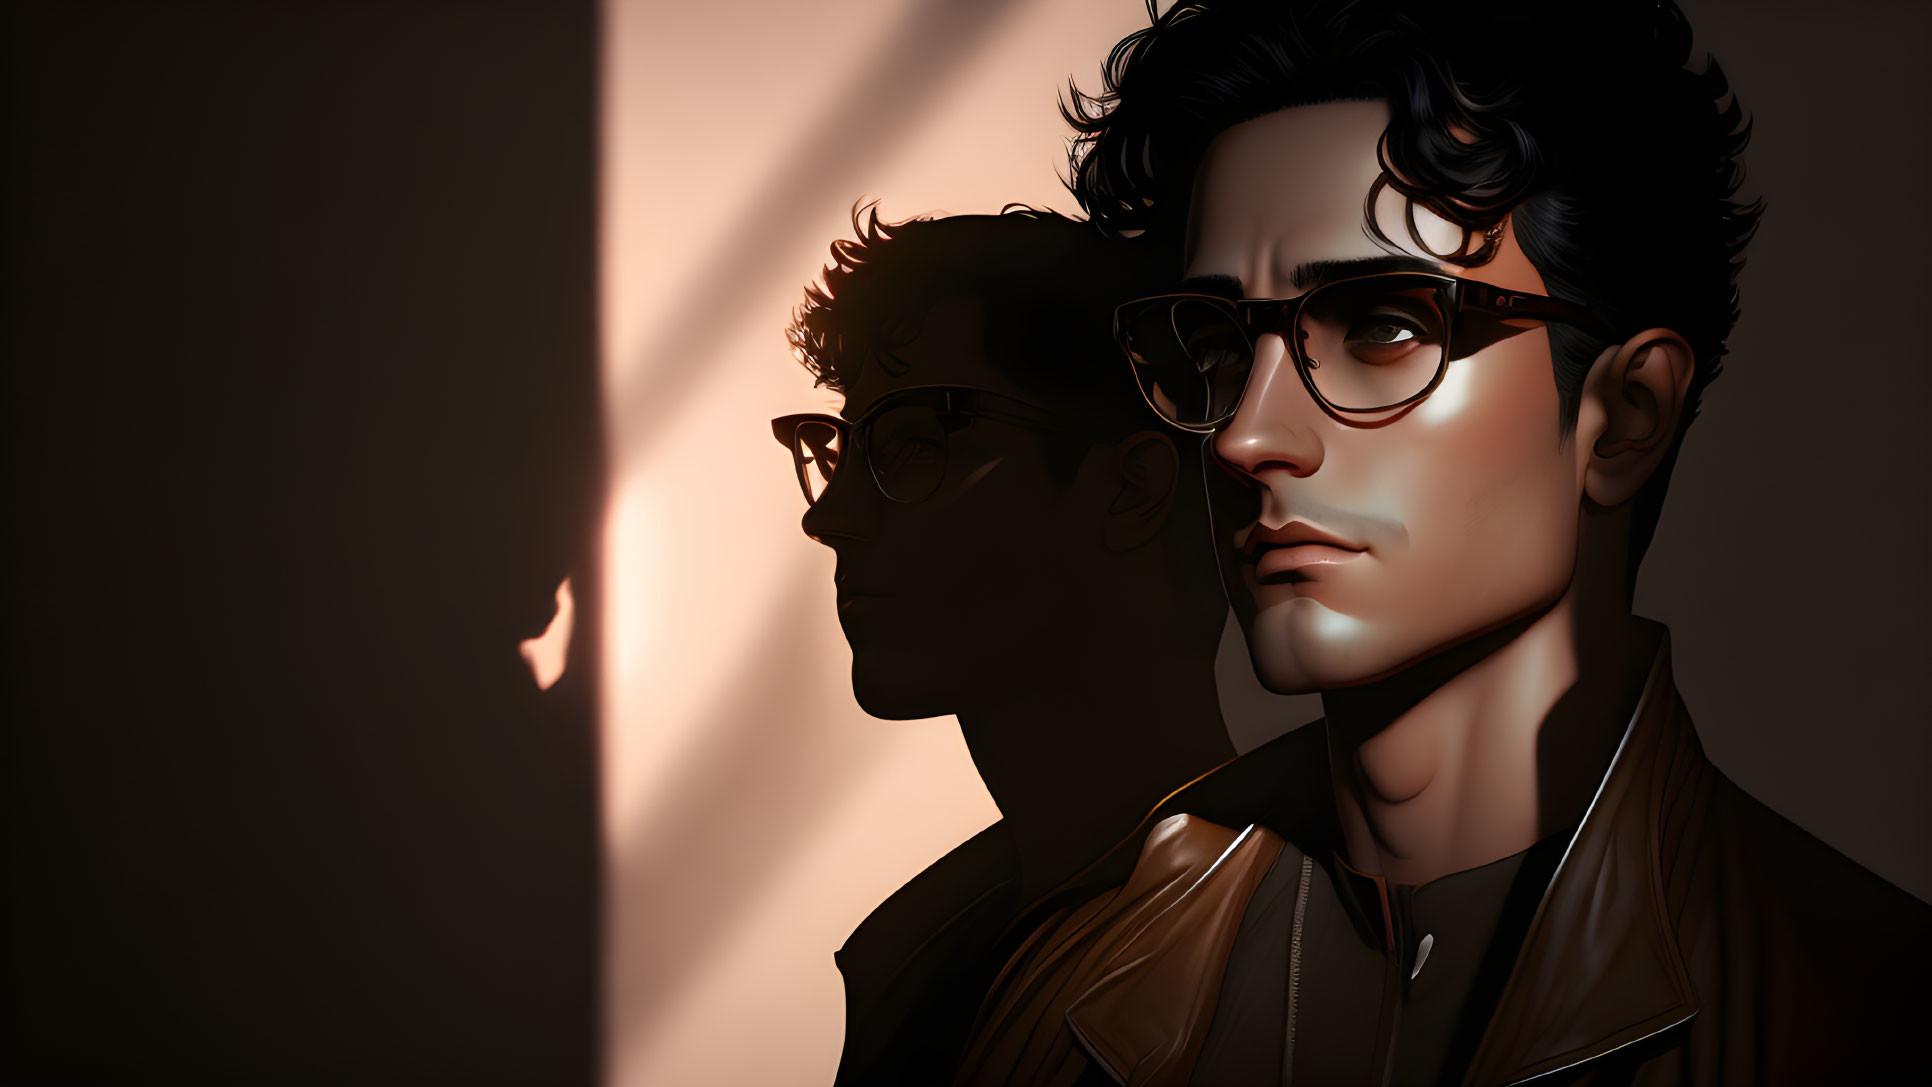 Stylized digital portrait of man with glasses in dimly lit room